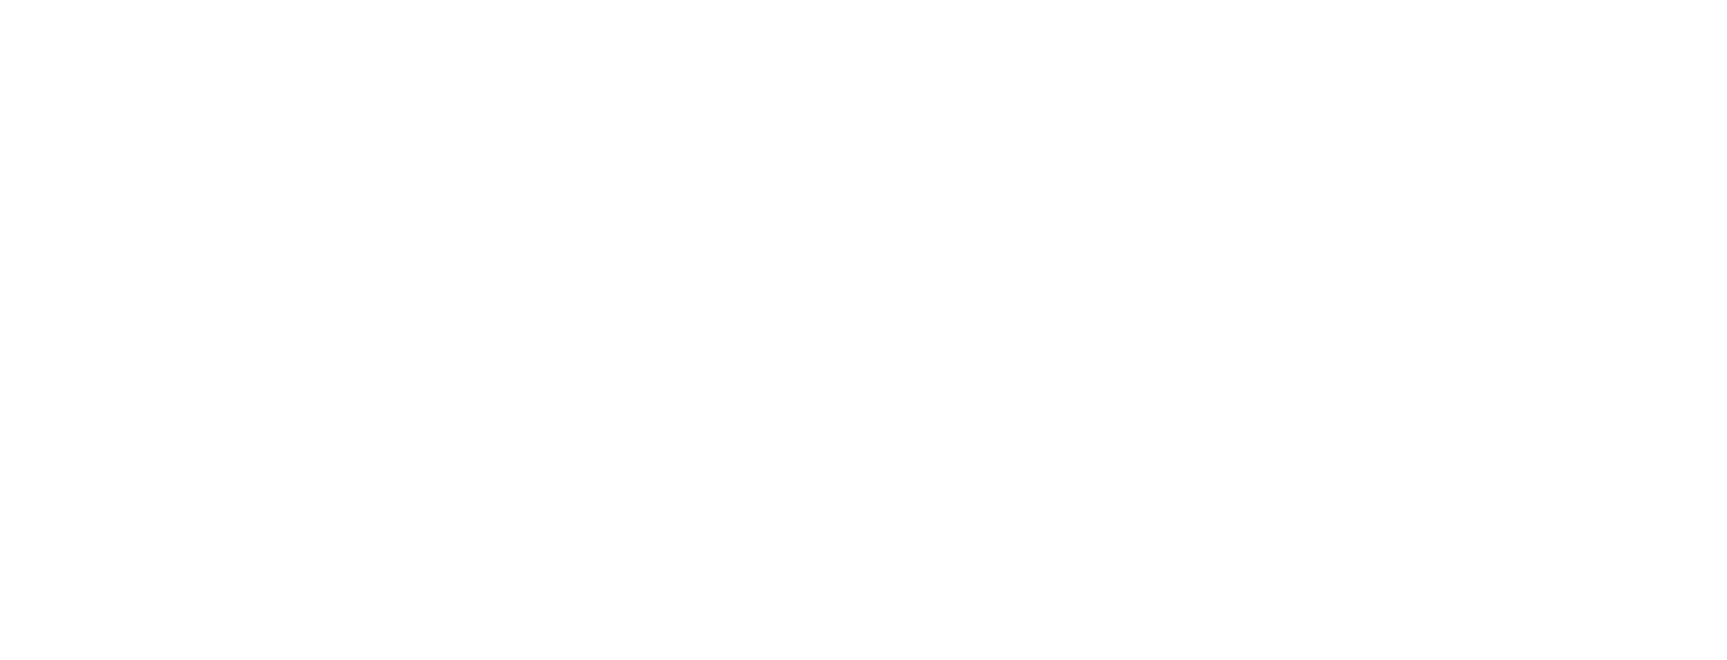 Premier Cosmetic Surgery